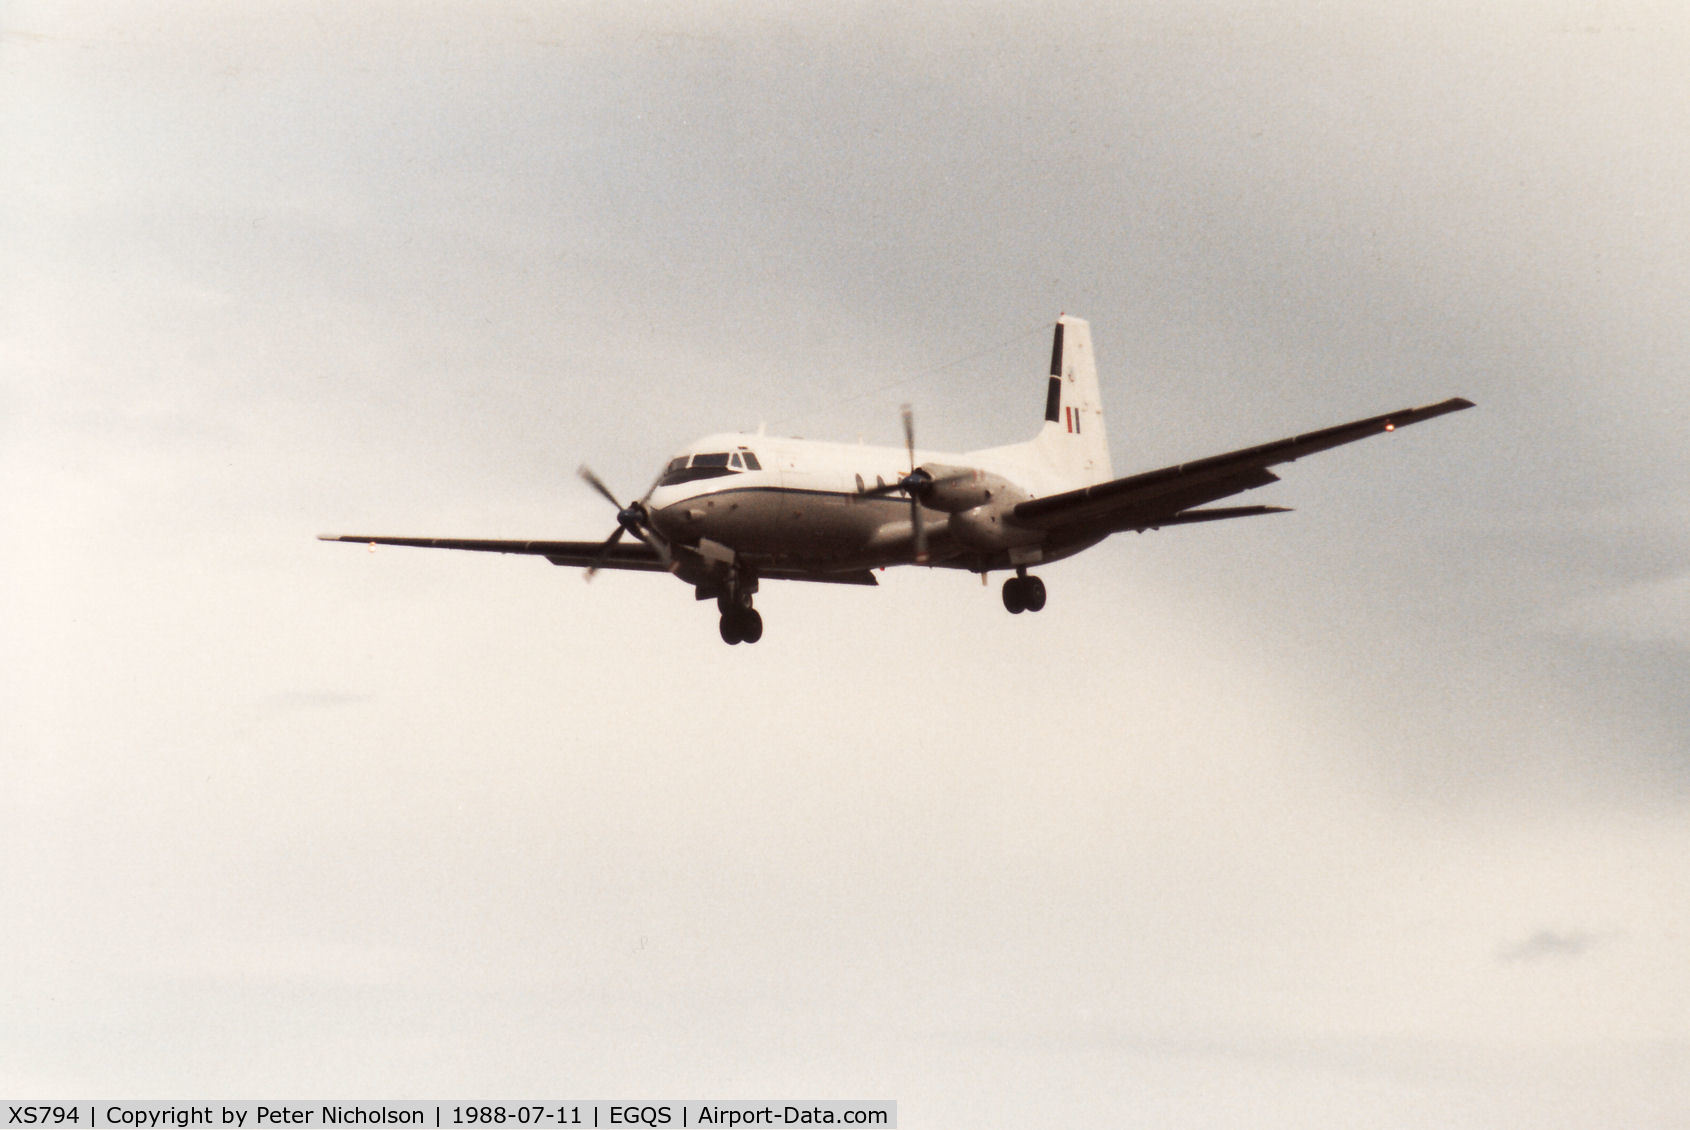 XS794, Hawker Siddeley HS-748 Andover CC2 C/N 1566, Andover CC.2 of 32 Squadron at RAF Northolt on final approach to RAF Lossiemouth in the Summer of 1988.